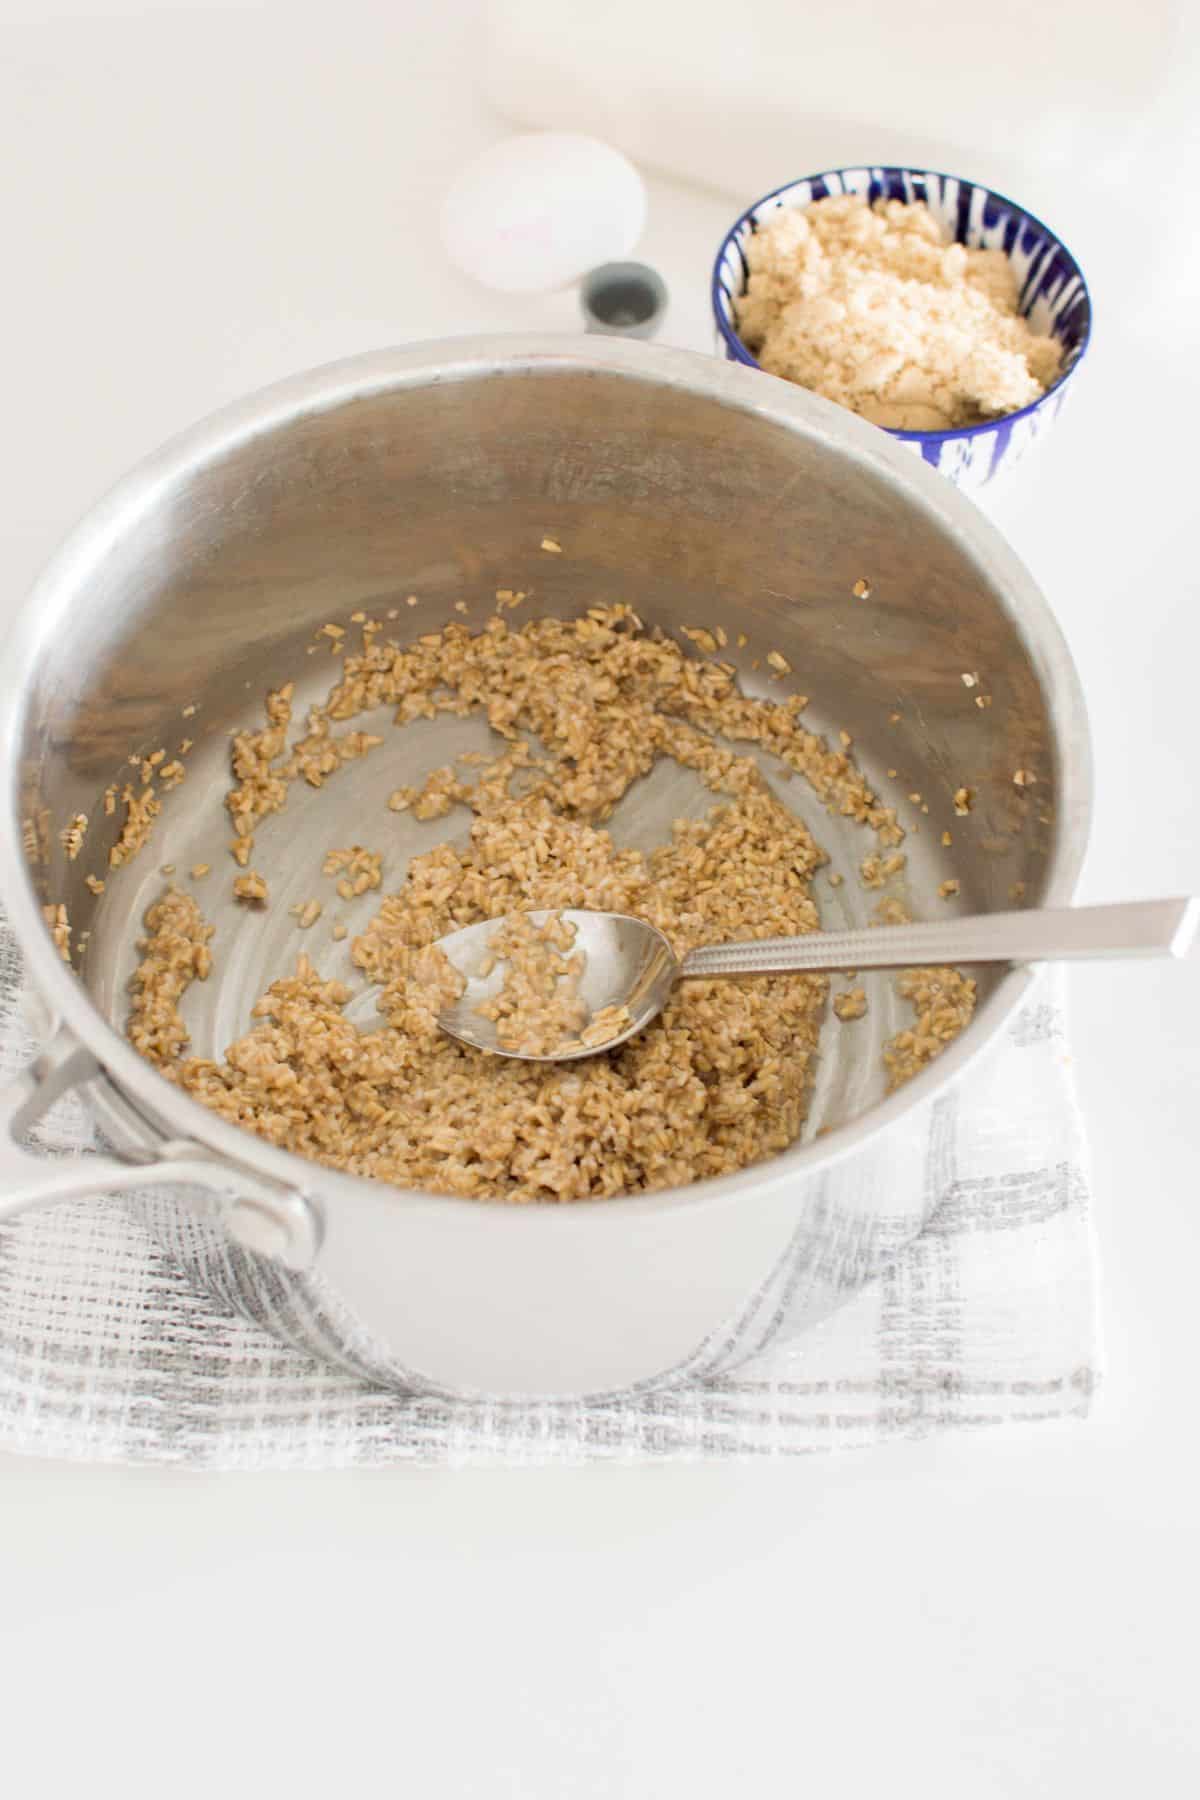 oats and water in a saucepan, with a spoon.